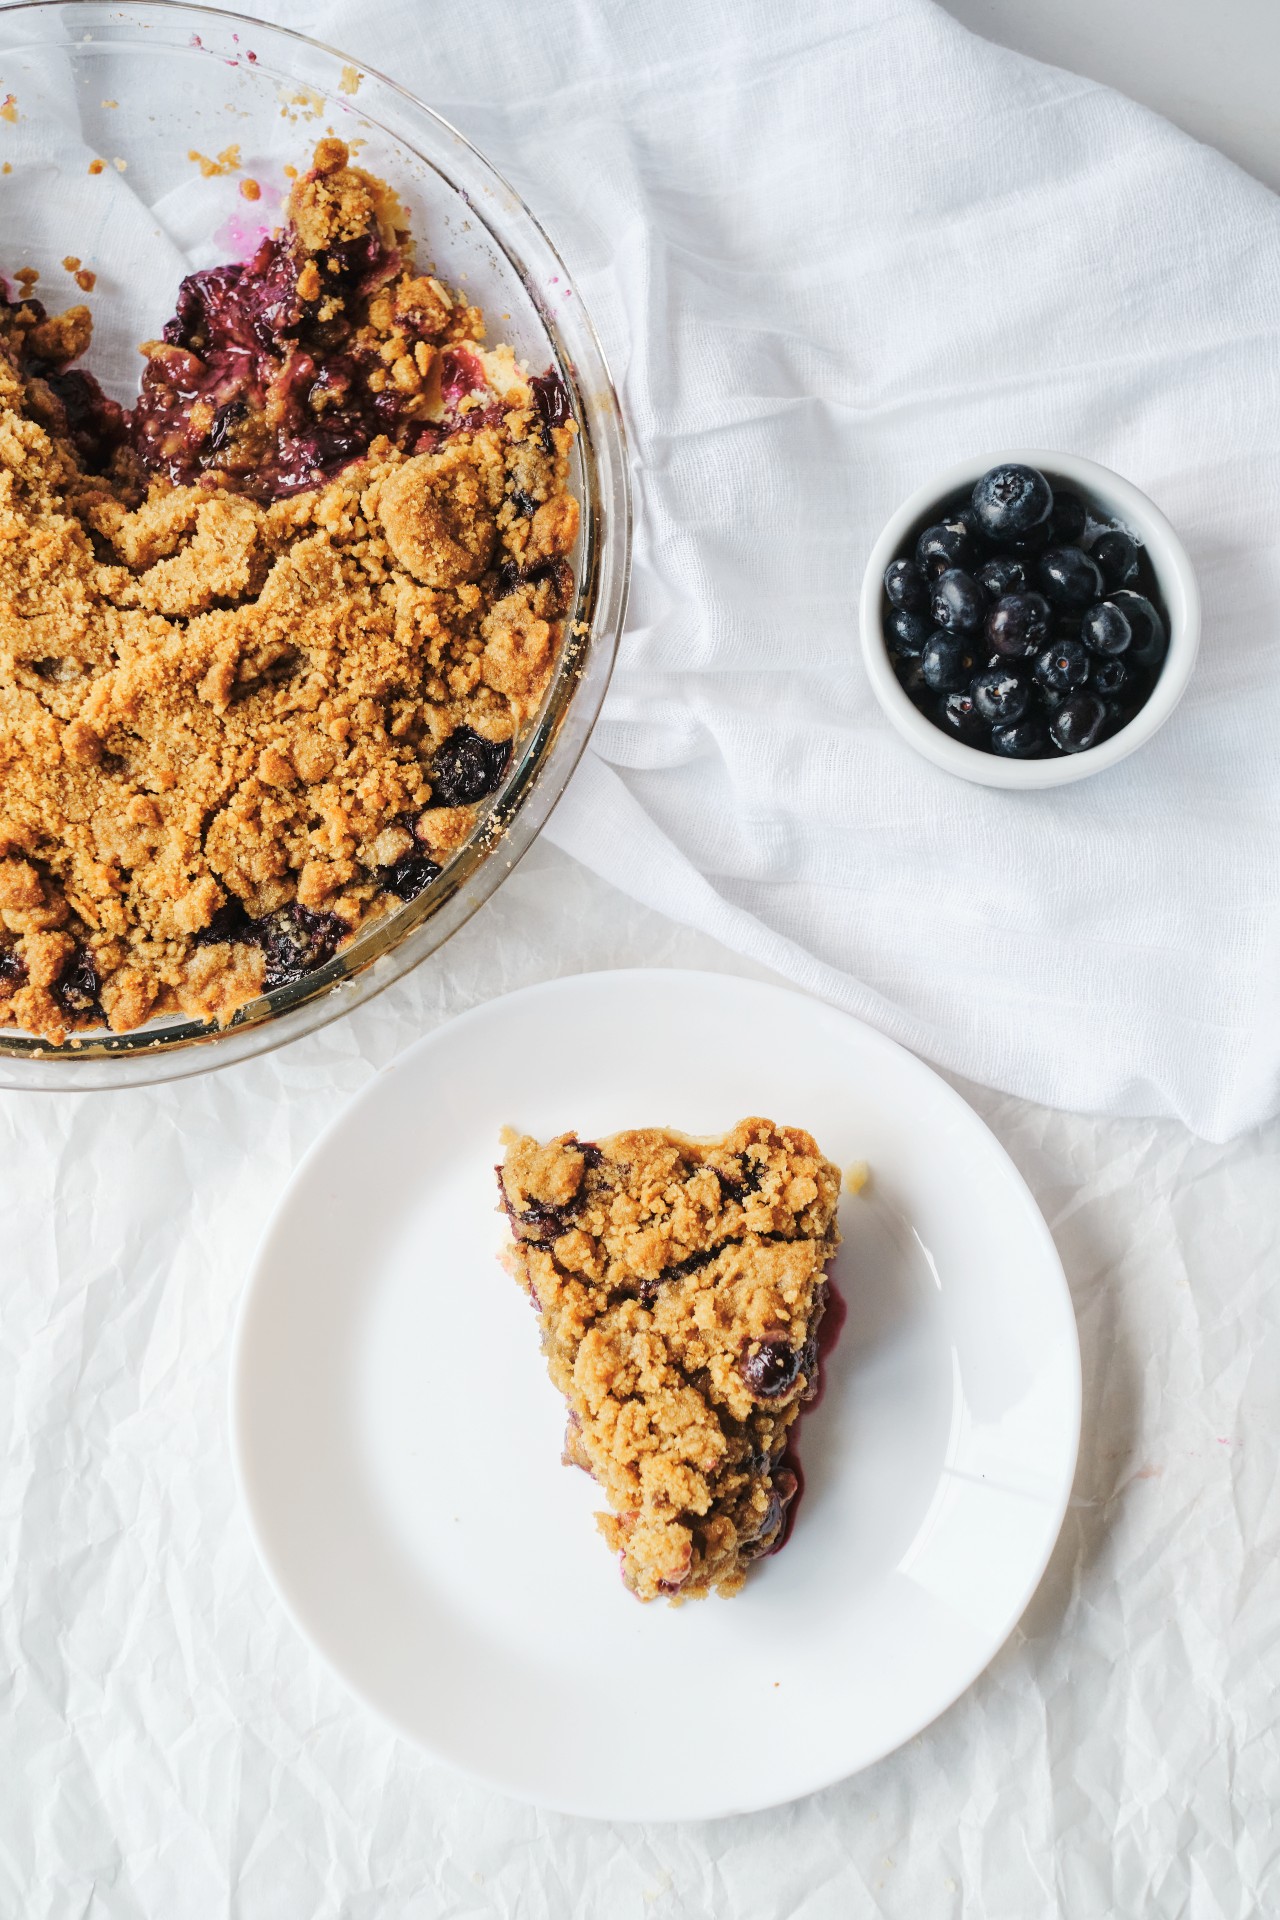 A blueberry crumble pie with a piece missing. The piece of pie is on a white plate on top of a napkin. There is a small bowl of blueberries shown. This article covers a Blueberry Crumble Pie recipe.